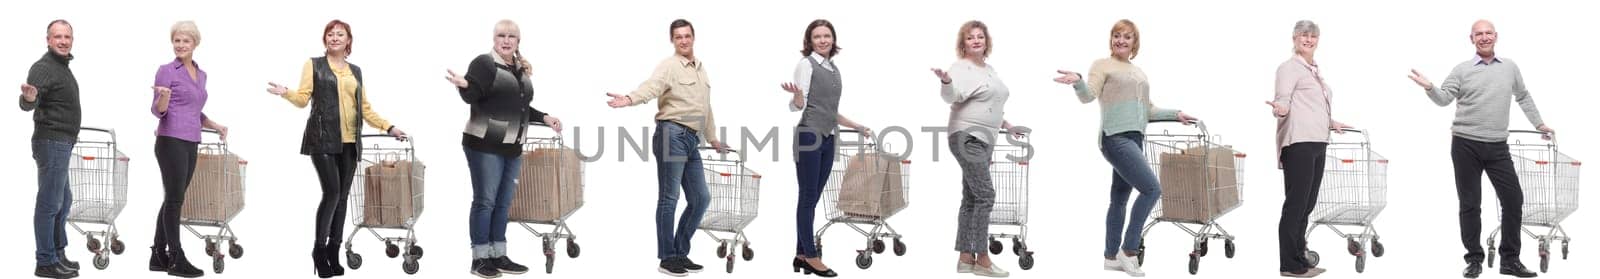 group of people with cart and outstretched hand thumbs up isolated on white background